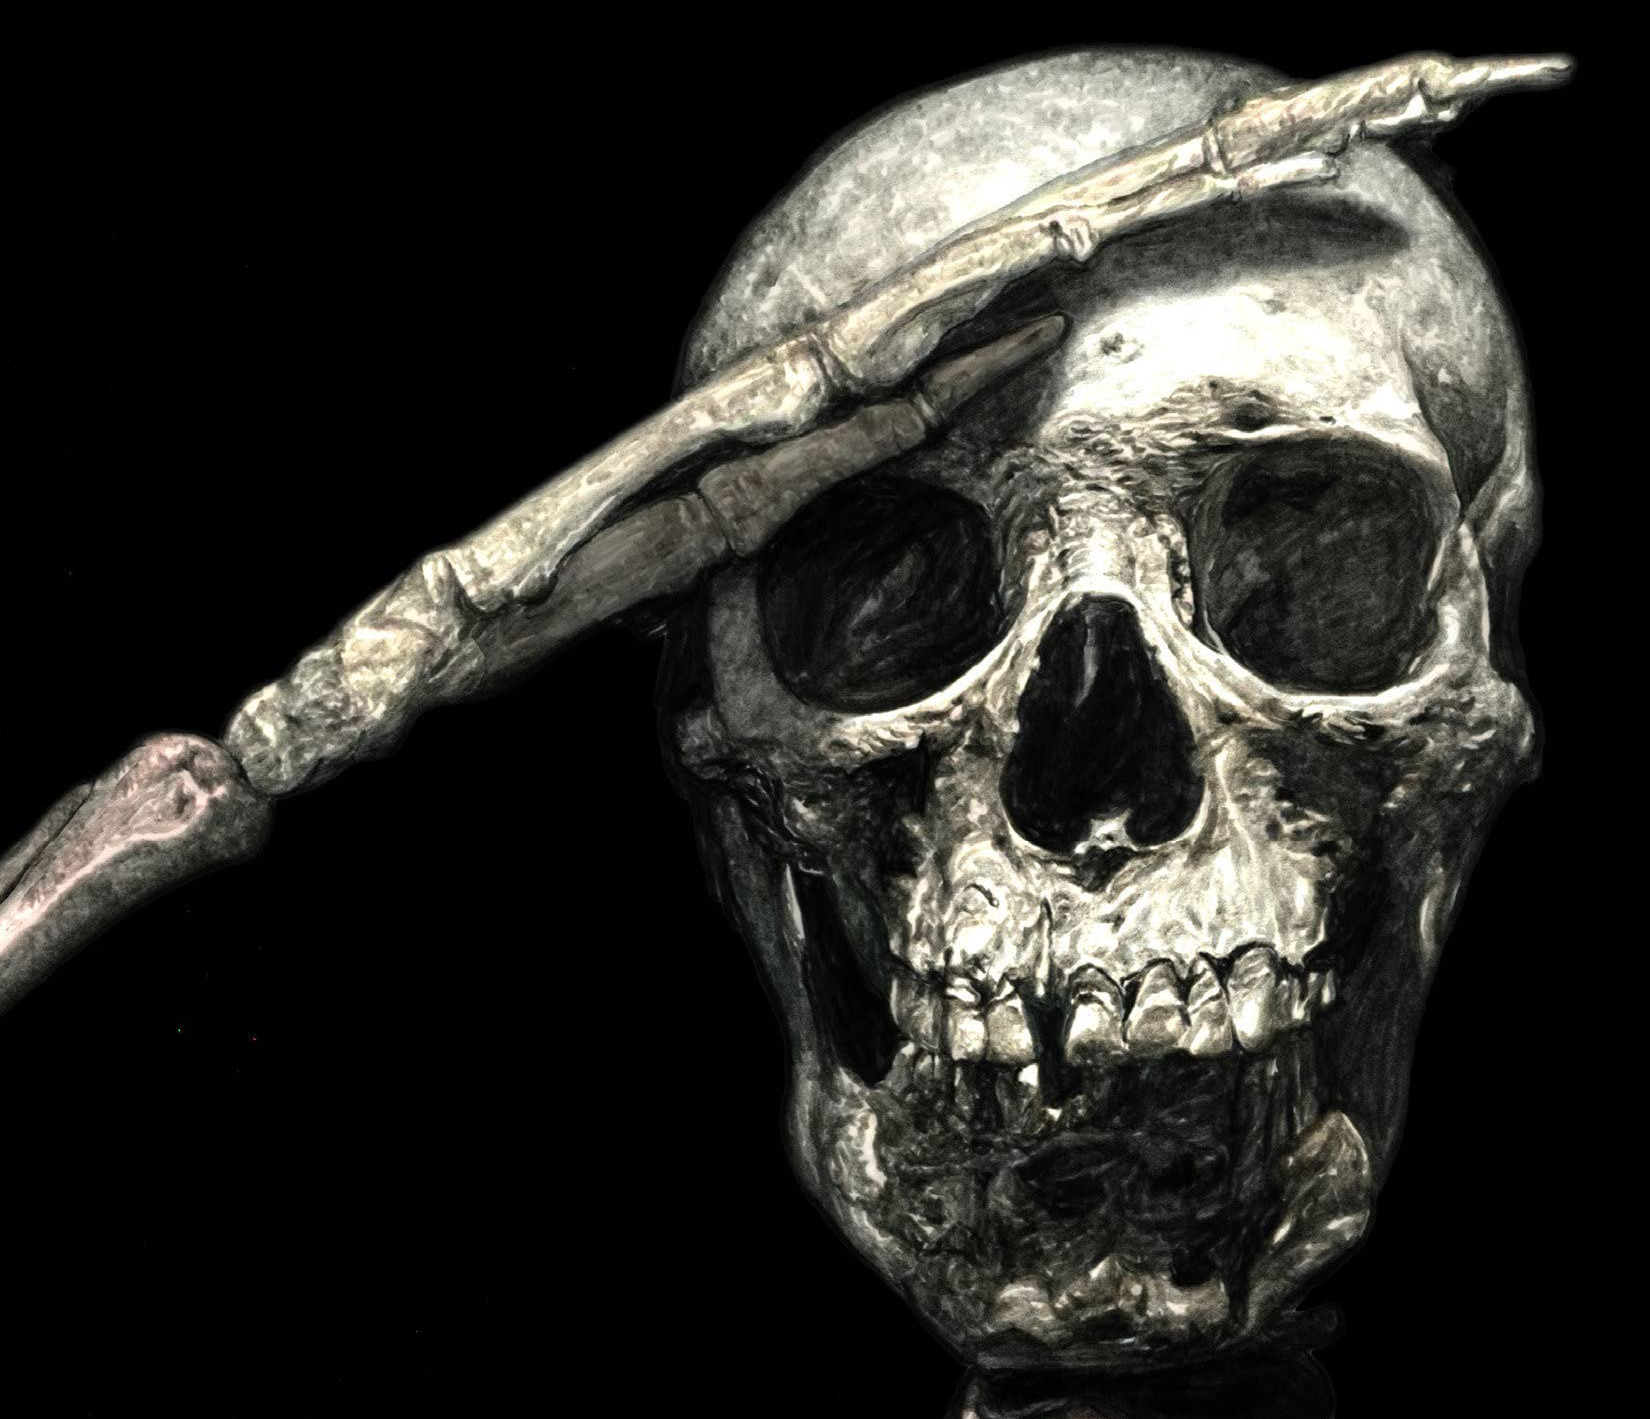 A realistic illustration of a skull with the skeletal hand at its forehead in salute